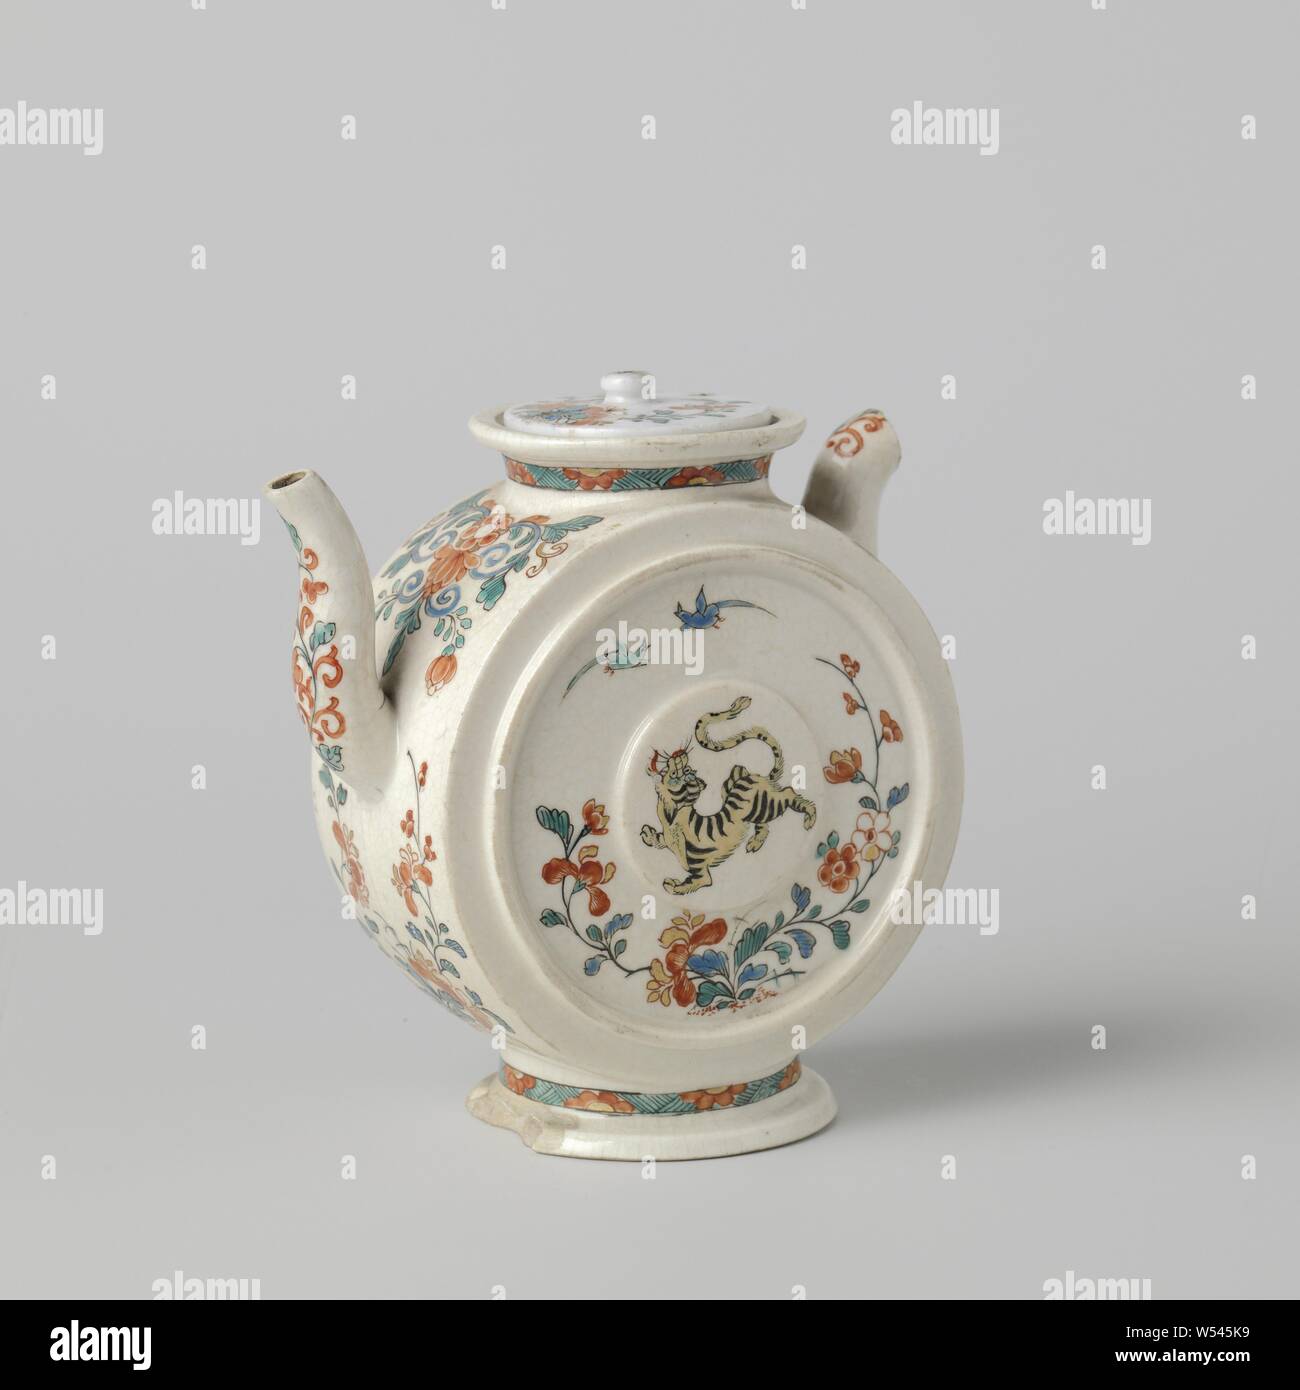 Teapot with a tiger, birds and floral scrolls, Teapot of soft-paste porcelain (pâte tendre) on foot and an S-shaped spout, painted on the glaze in blue, red, green, yellow, black and gold. The belly is in the form of a cylinder standing on the side, with a raised medallion and a raised circle on the flat wall. On the wall a tiger, two birds and a flowering plant. The round wall, the spout and the ear with flower vines. On the neck and foot a band with hatching interrupted by half flowers. The ear has largely broken off. Porcelain lid with floral scrolls is not matching. Kakiemon style Stock Photo